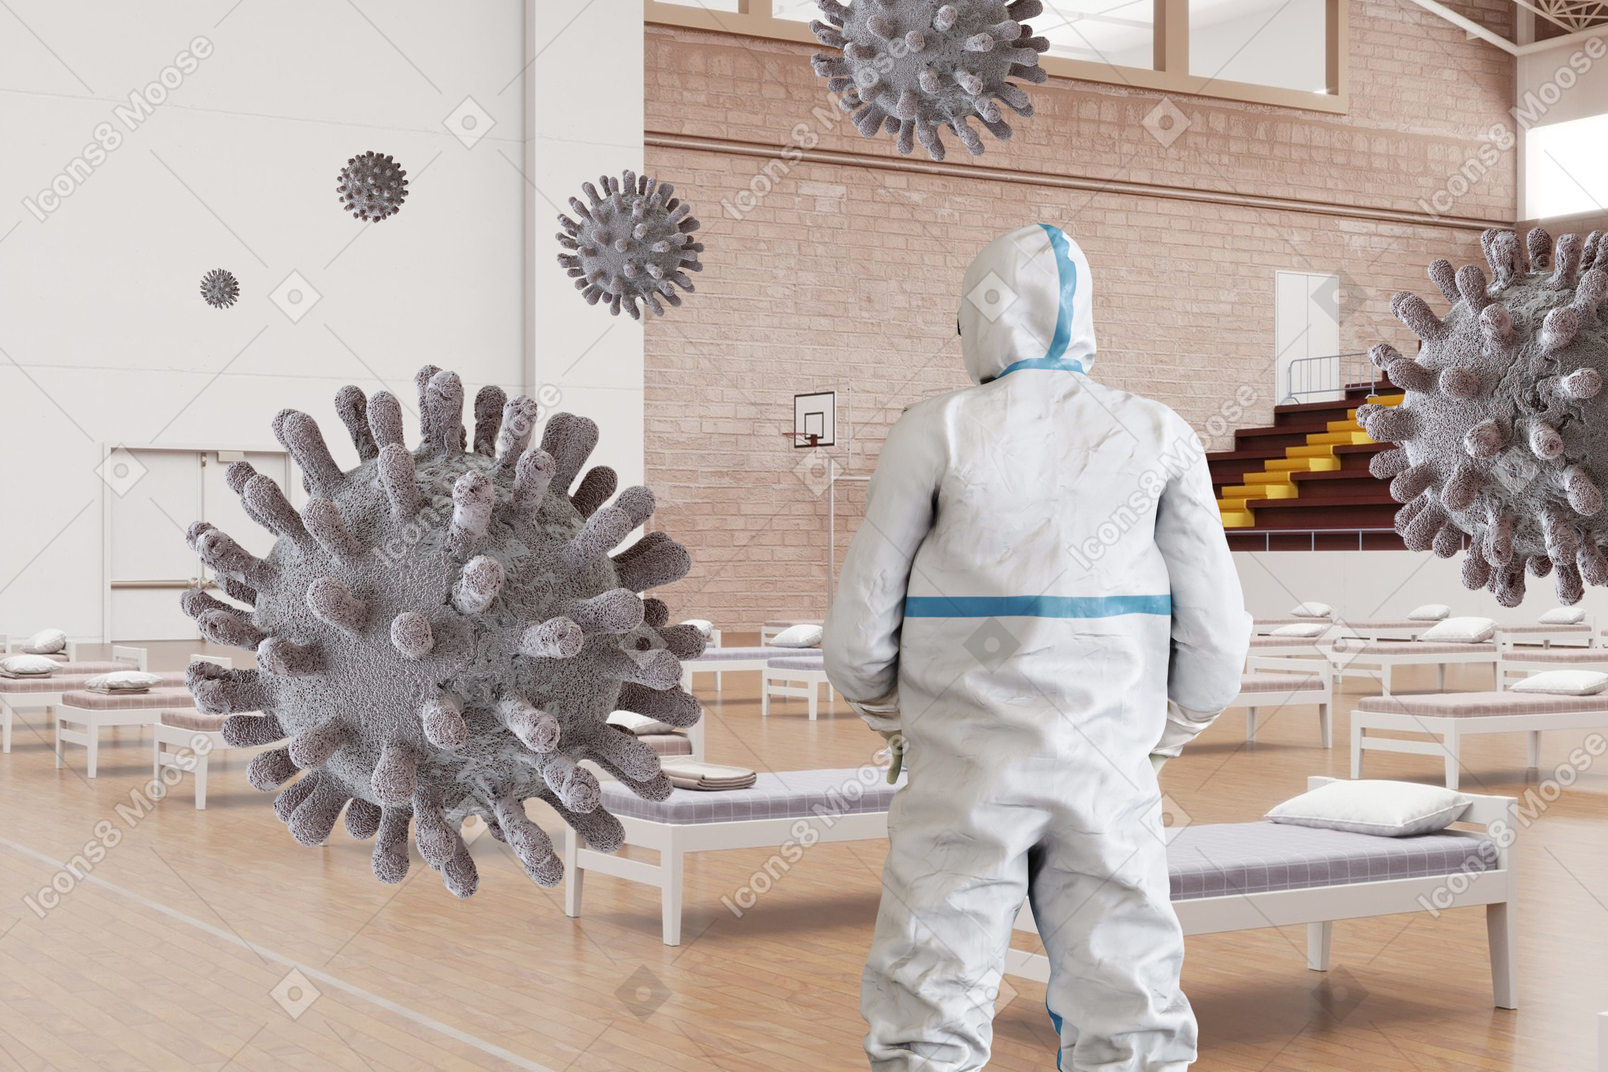 Person in protective gear standing among the viruses